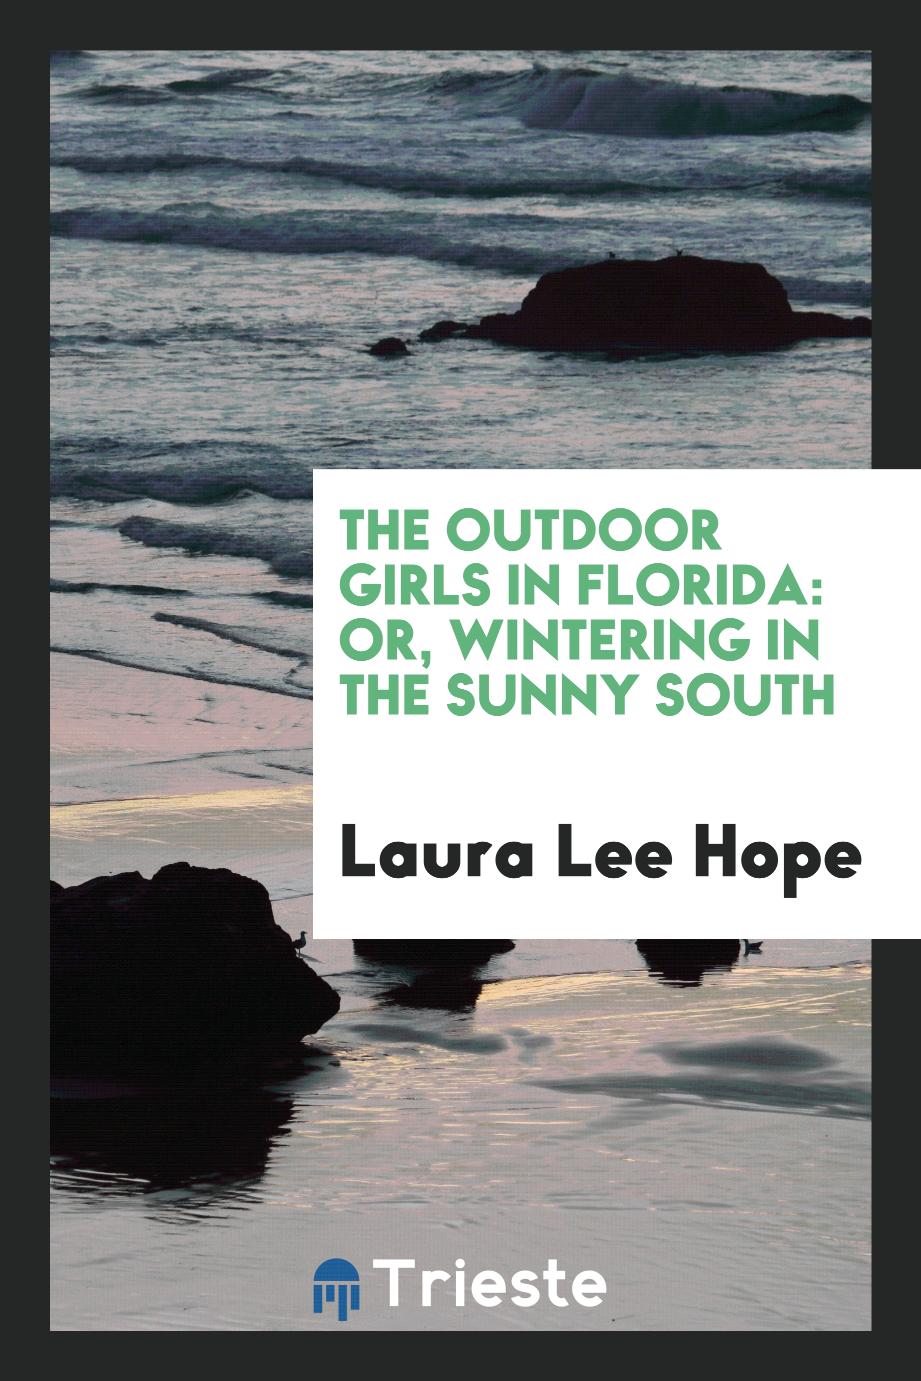 The outdoor girls in Florida: or, wintering in the sunny south